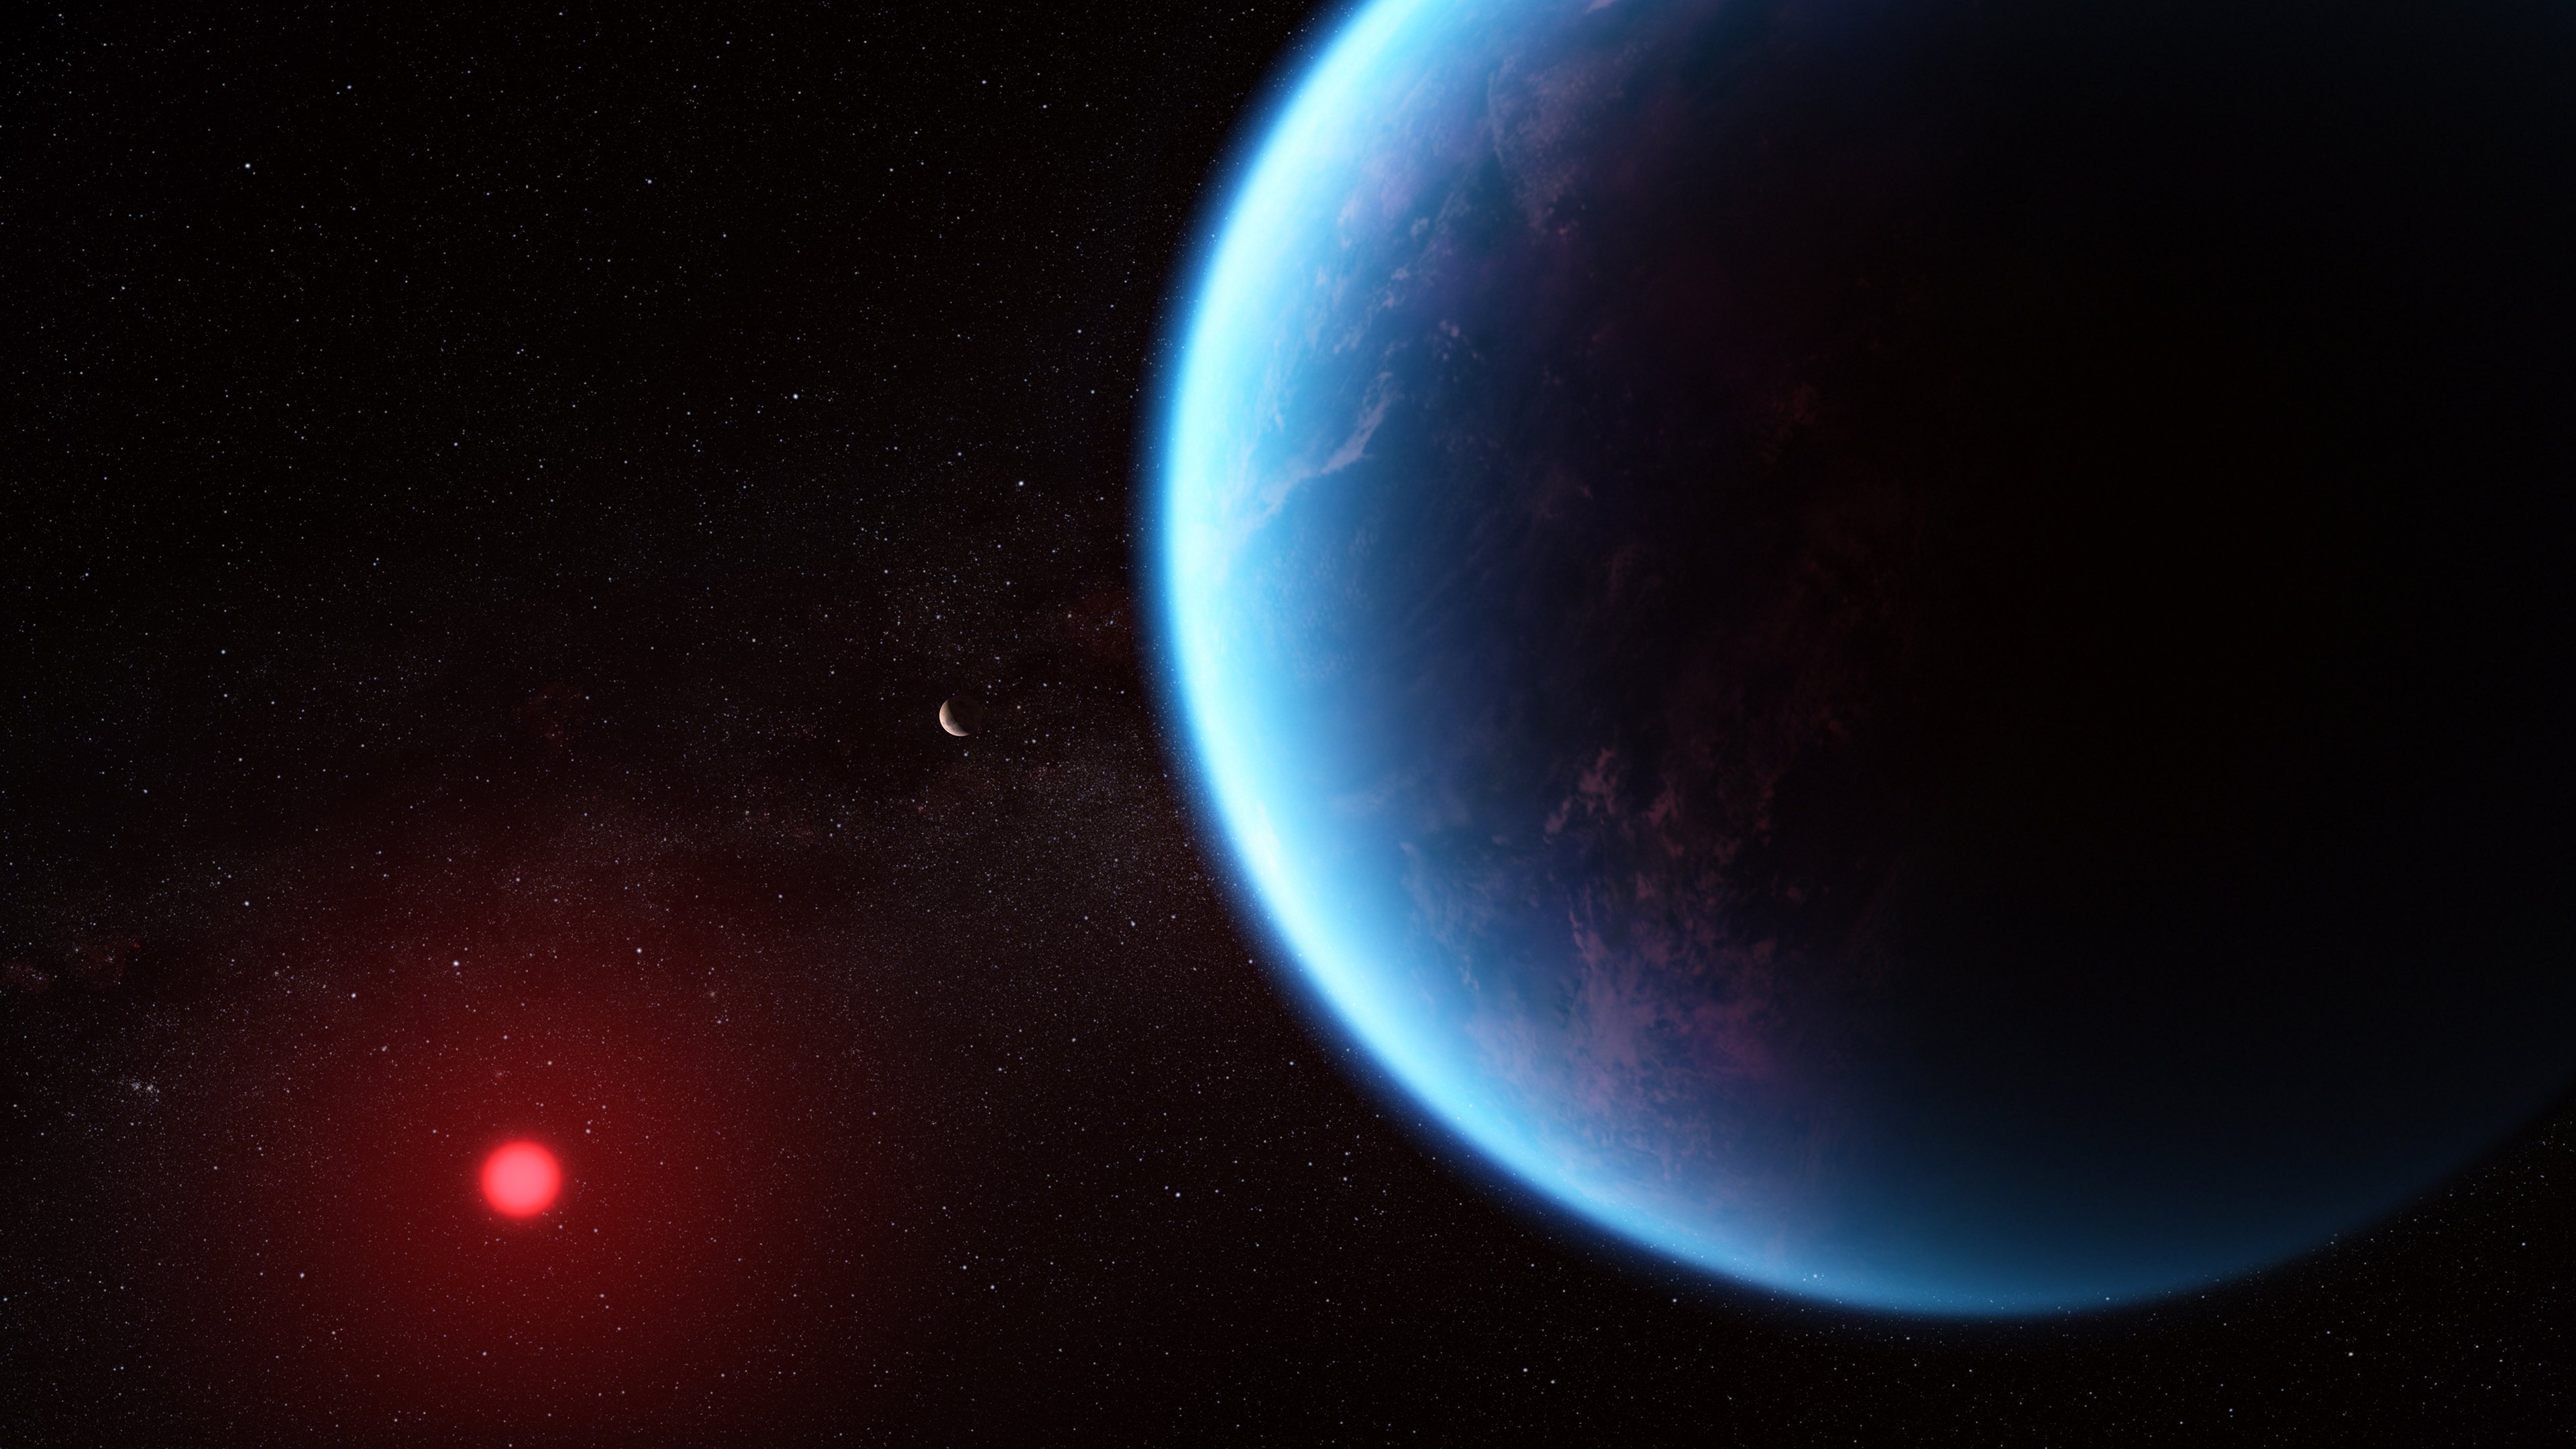 Planet K2-18b could have possible signs of life, Webb data reveals